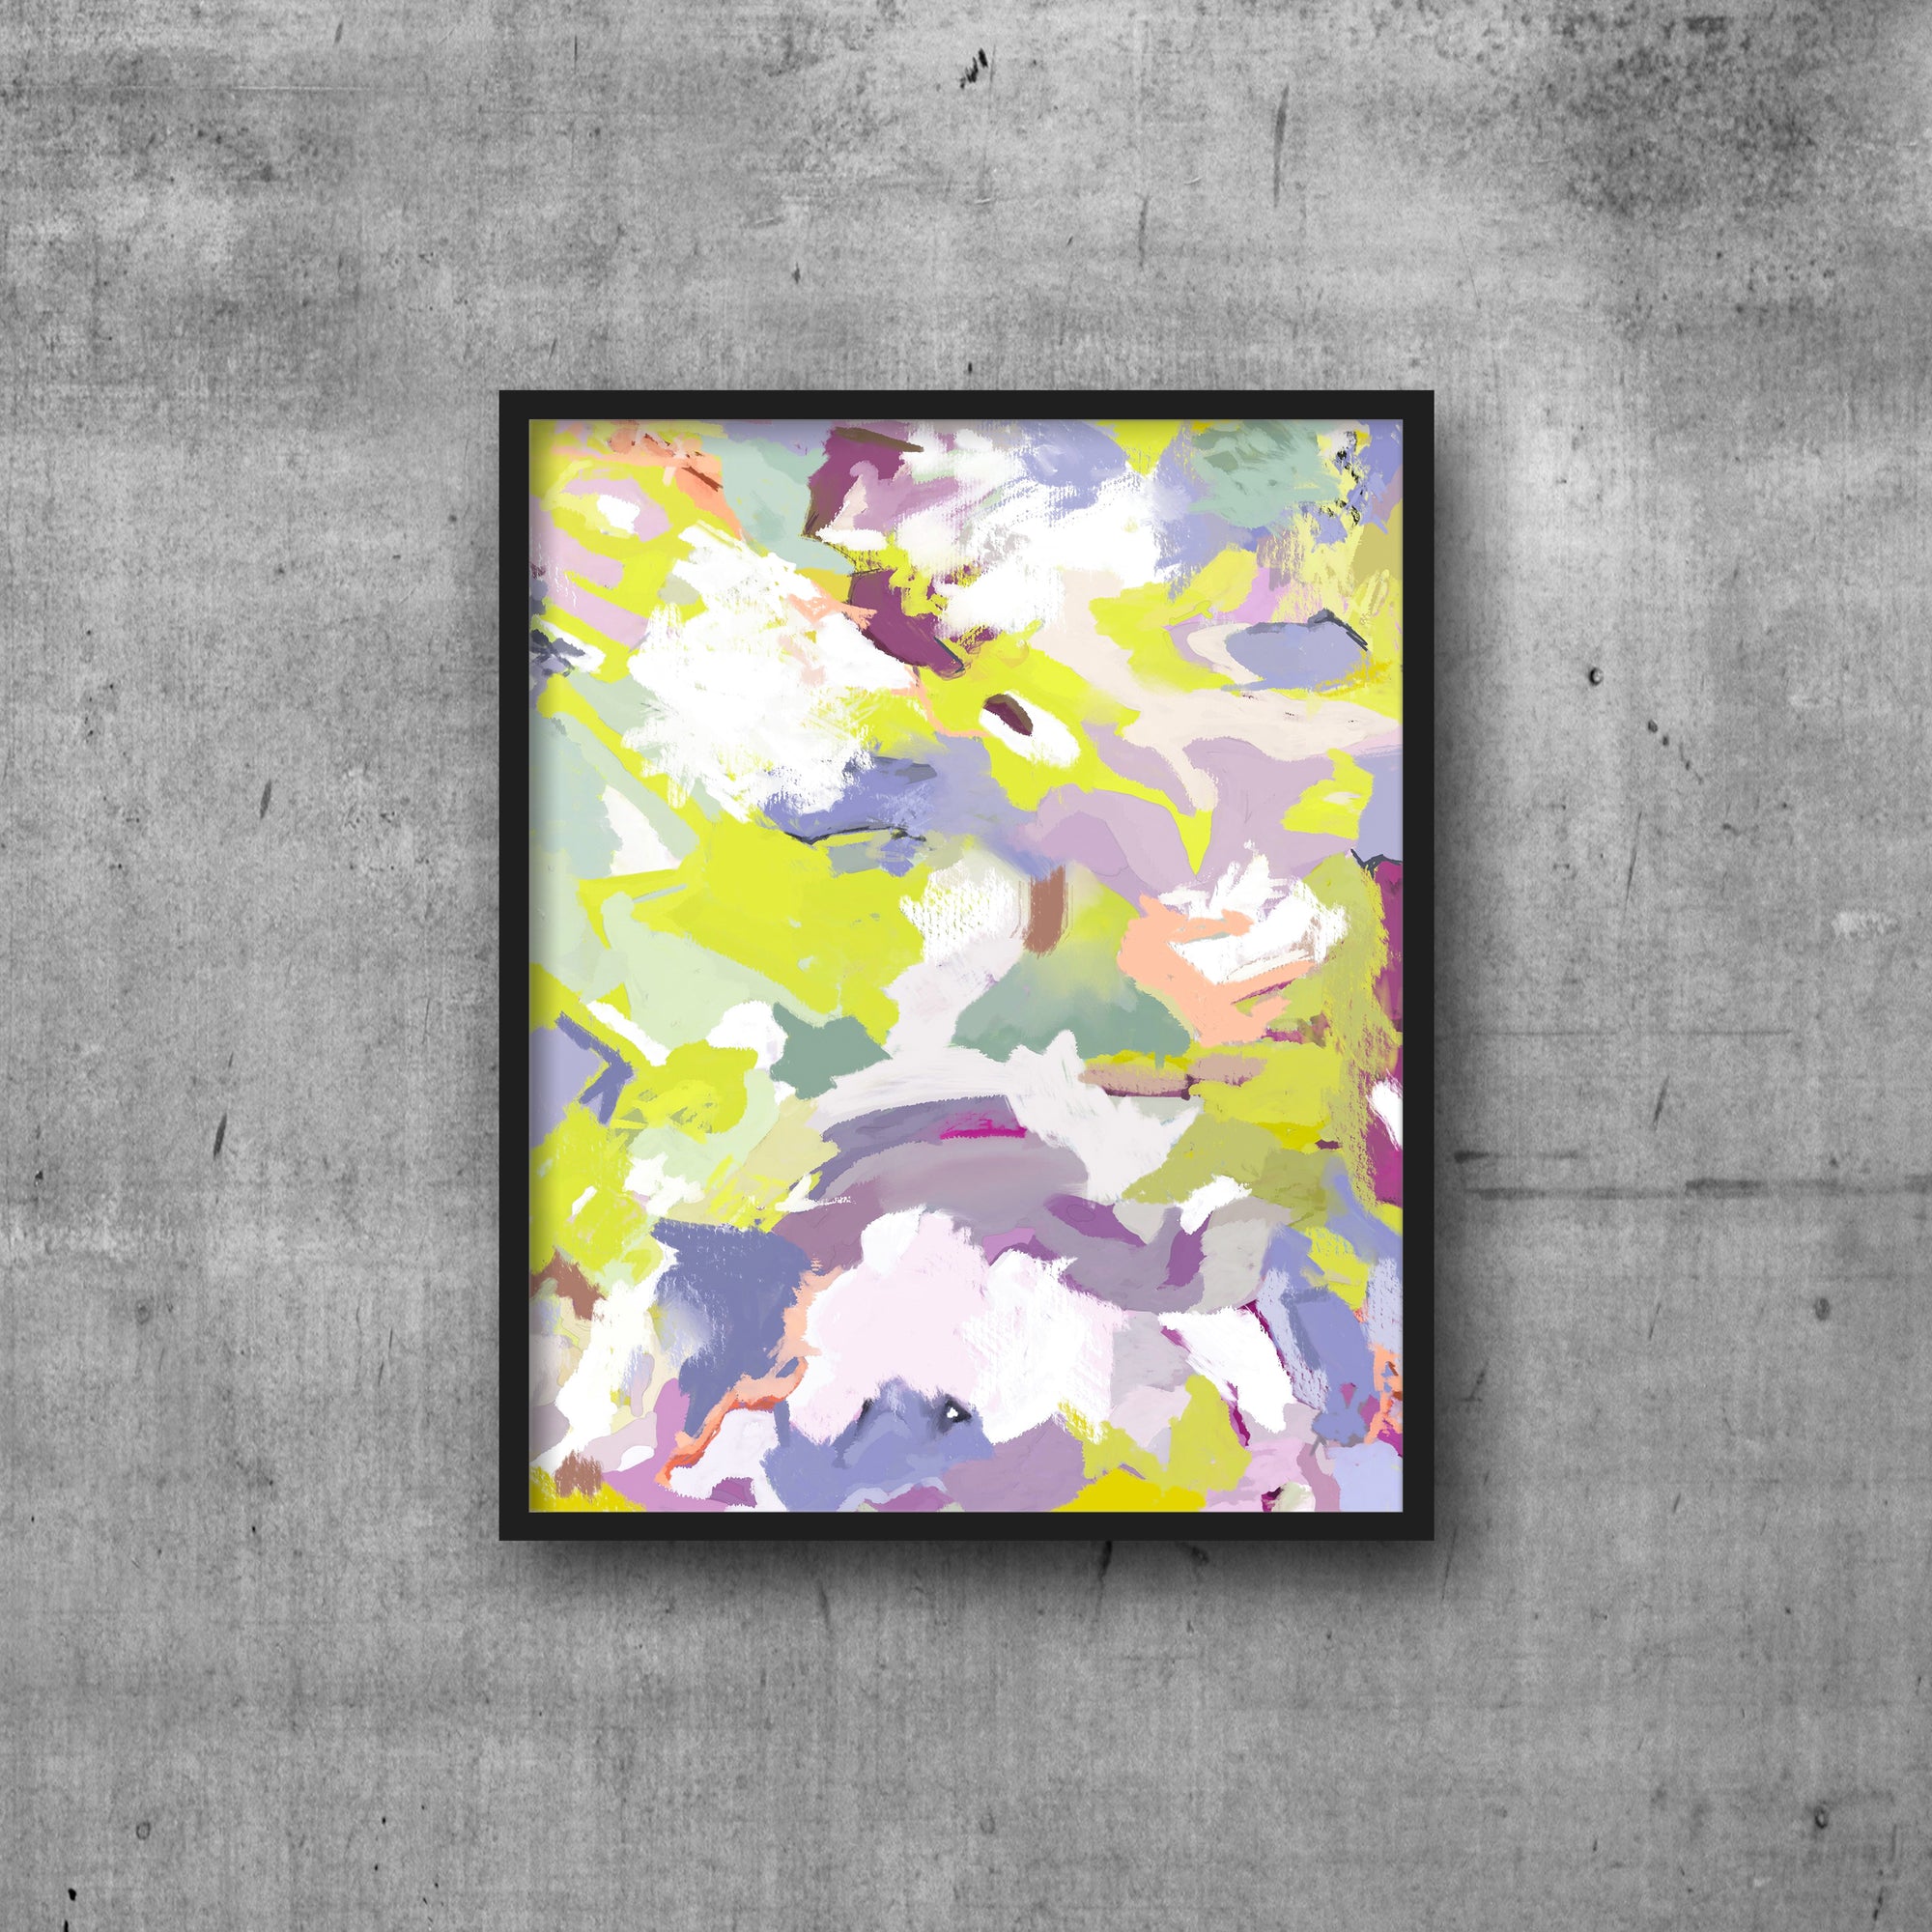 Abstract art print in chartreuse, lilac, and peach tones. In black frame.